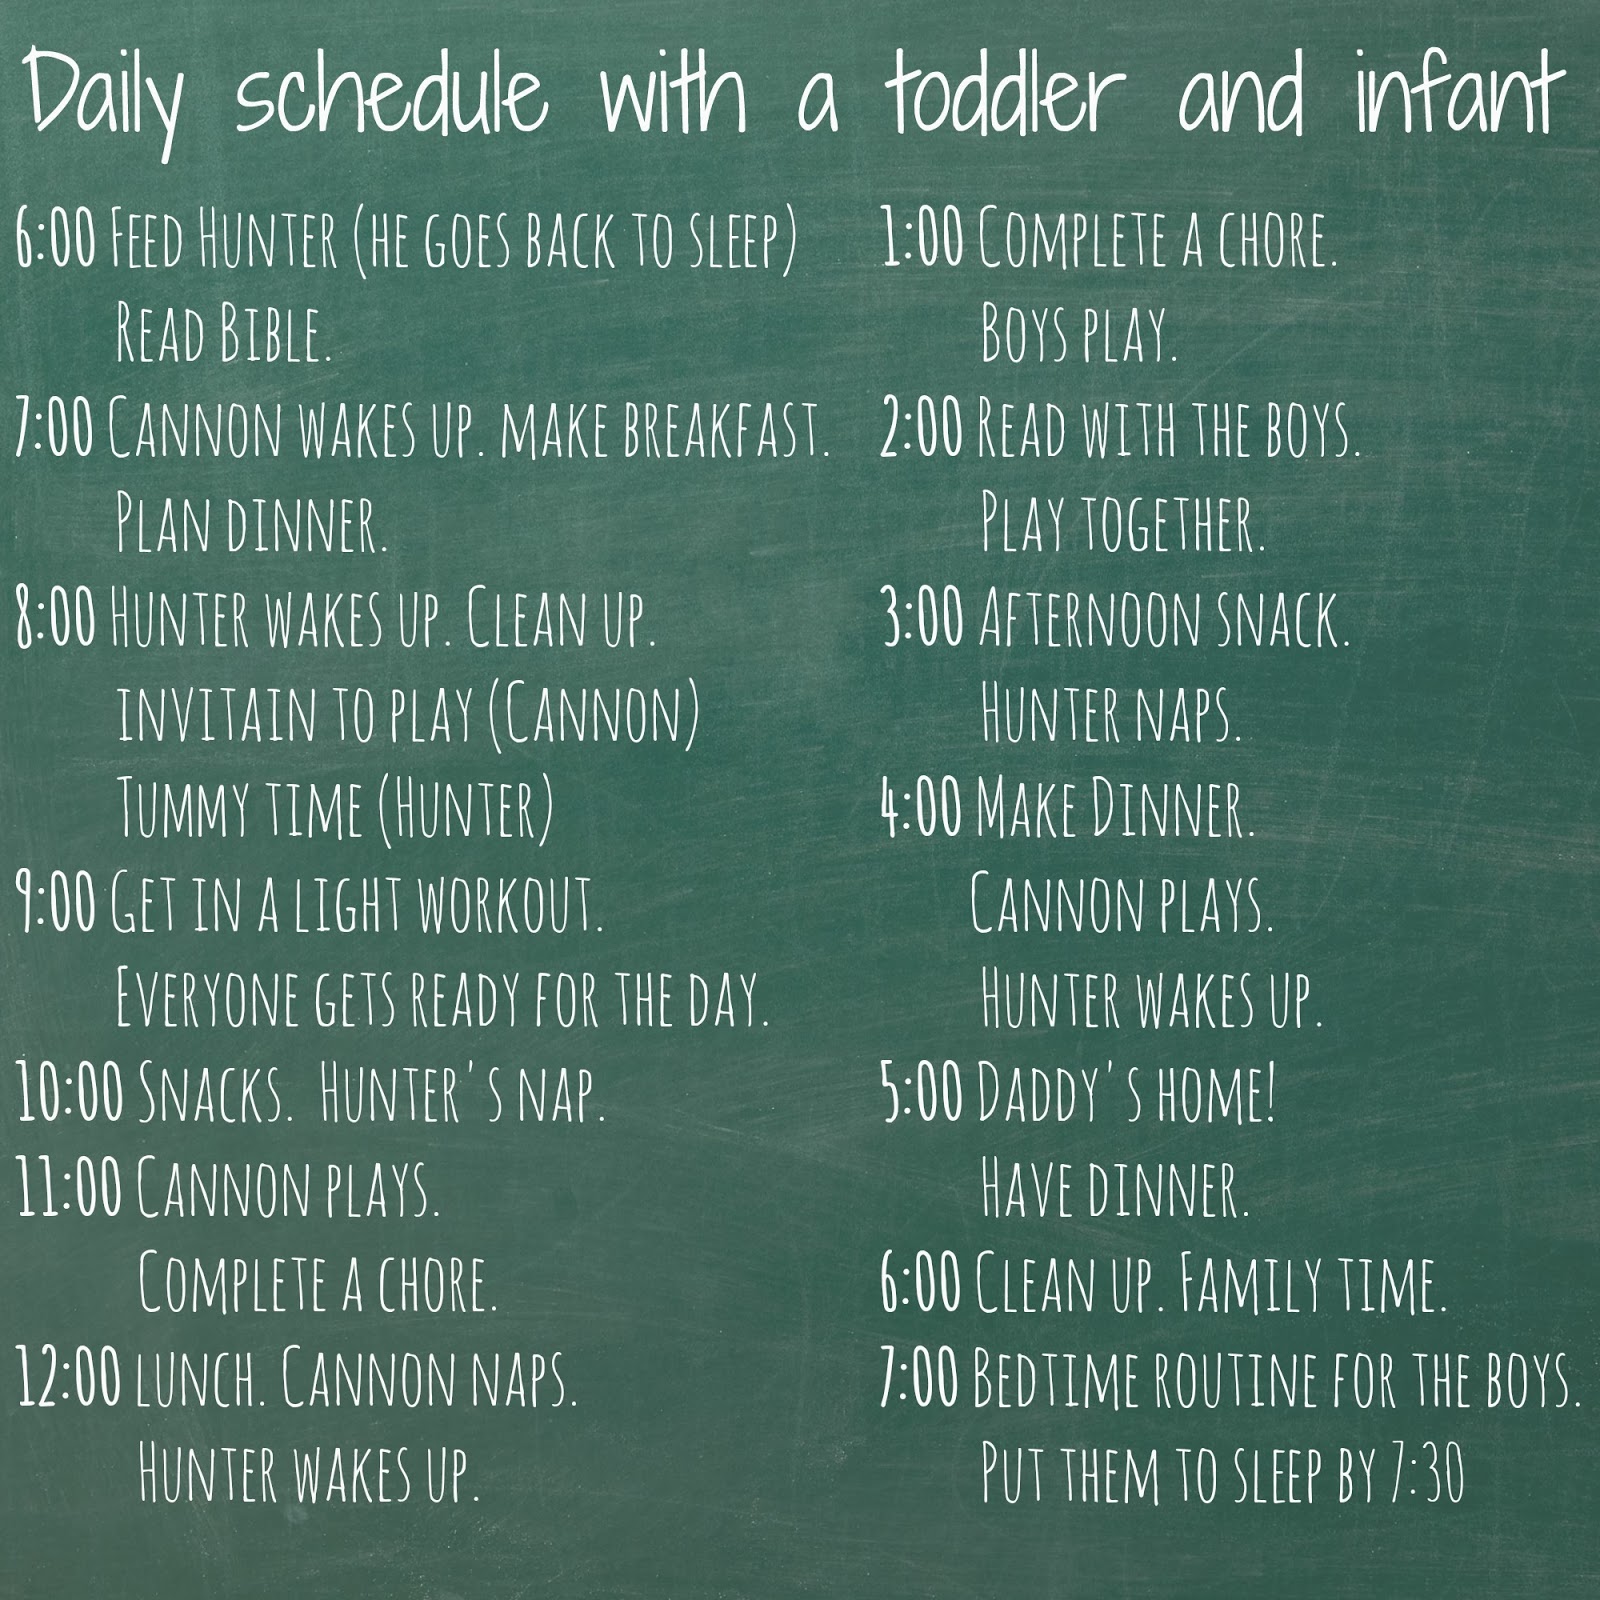 pdf infant daily schedule